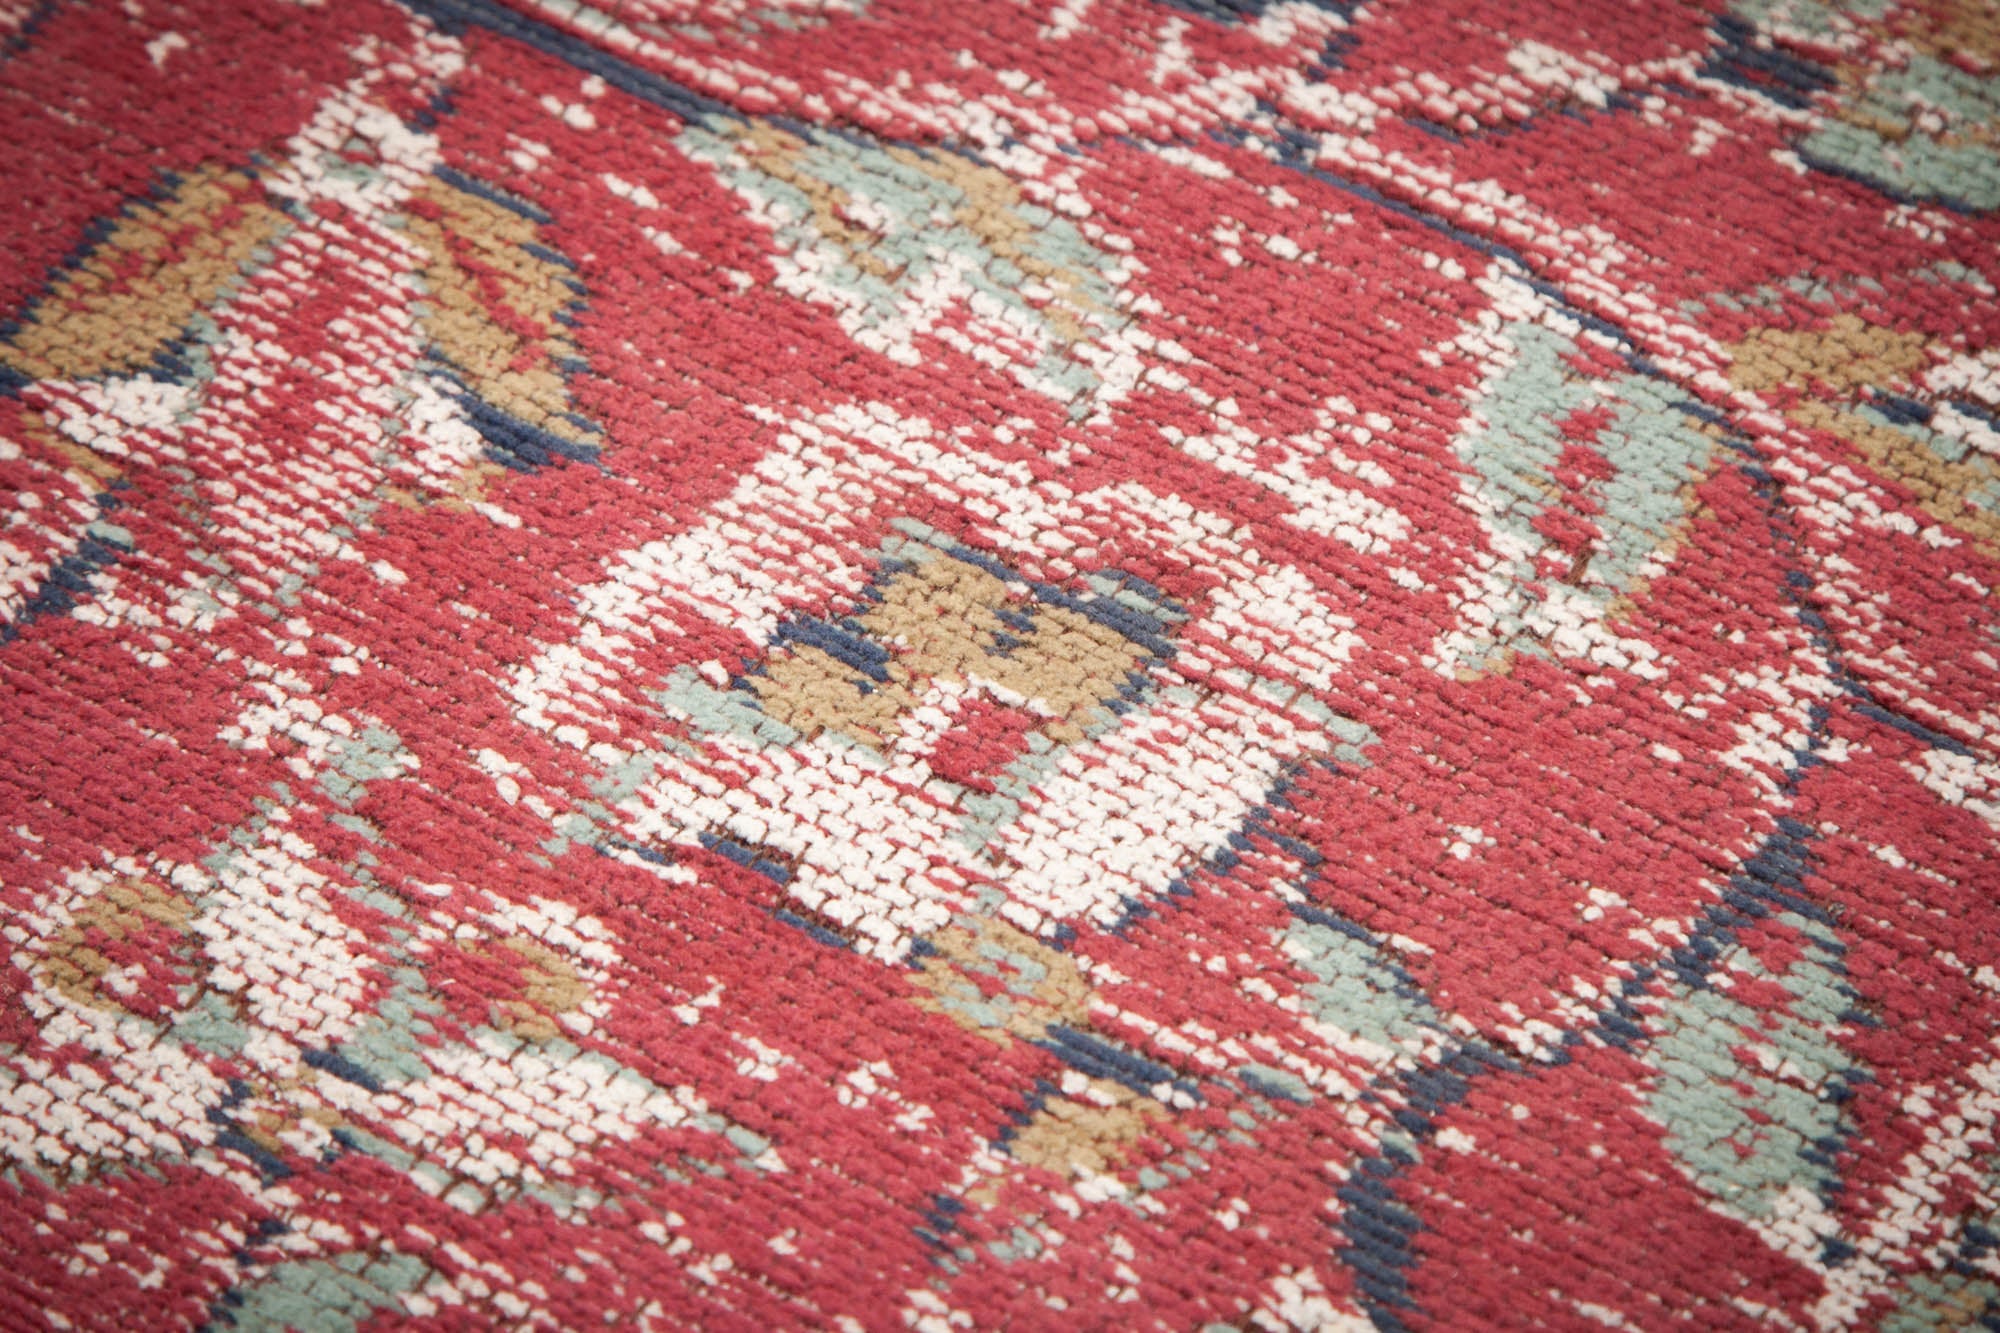 Rug Old Marrakech 350x240cm Cotton Red